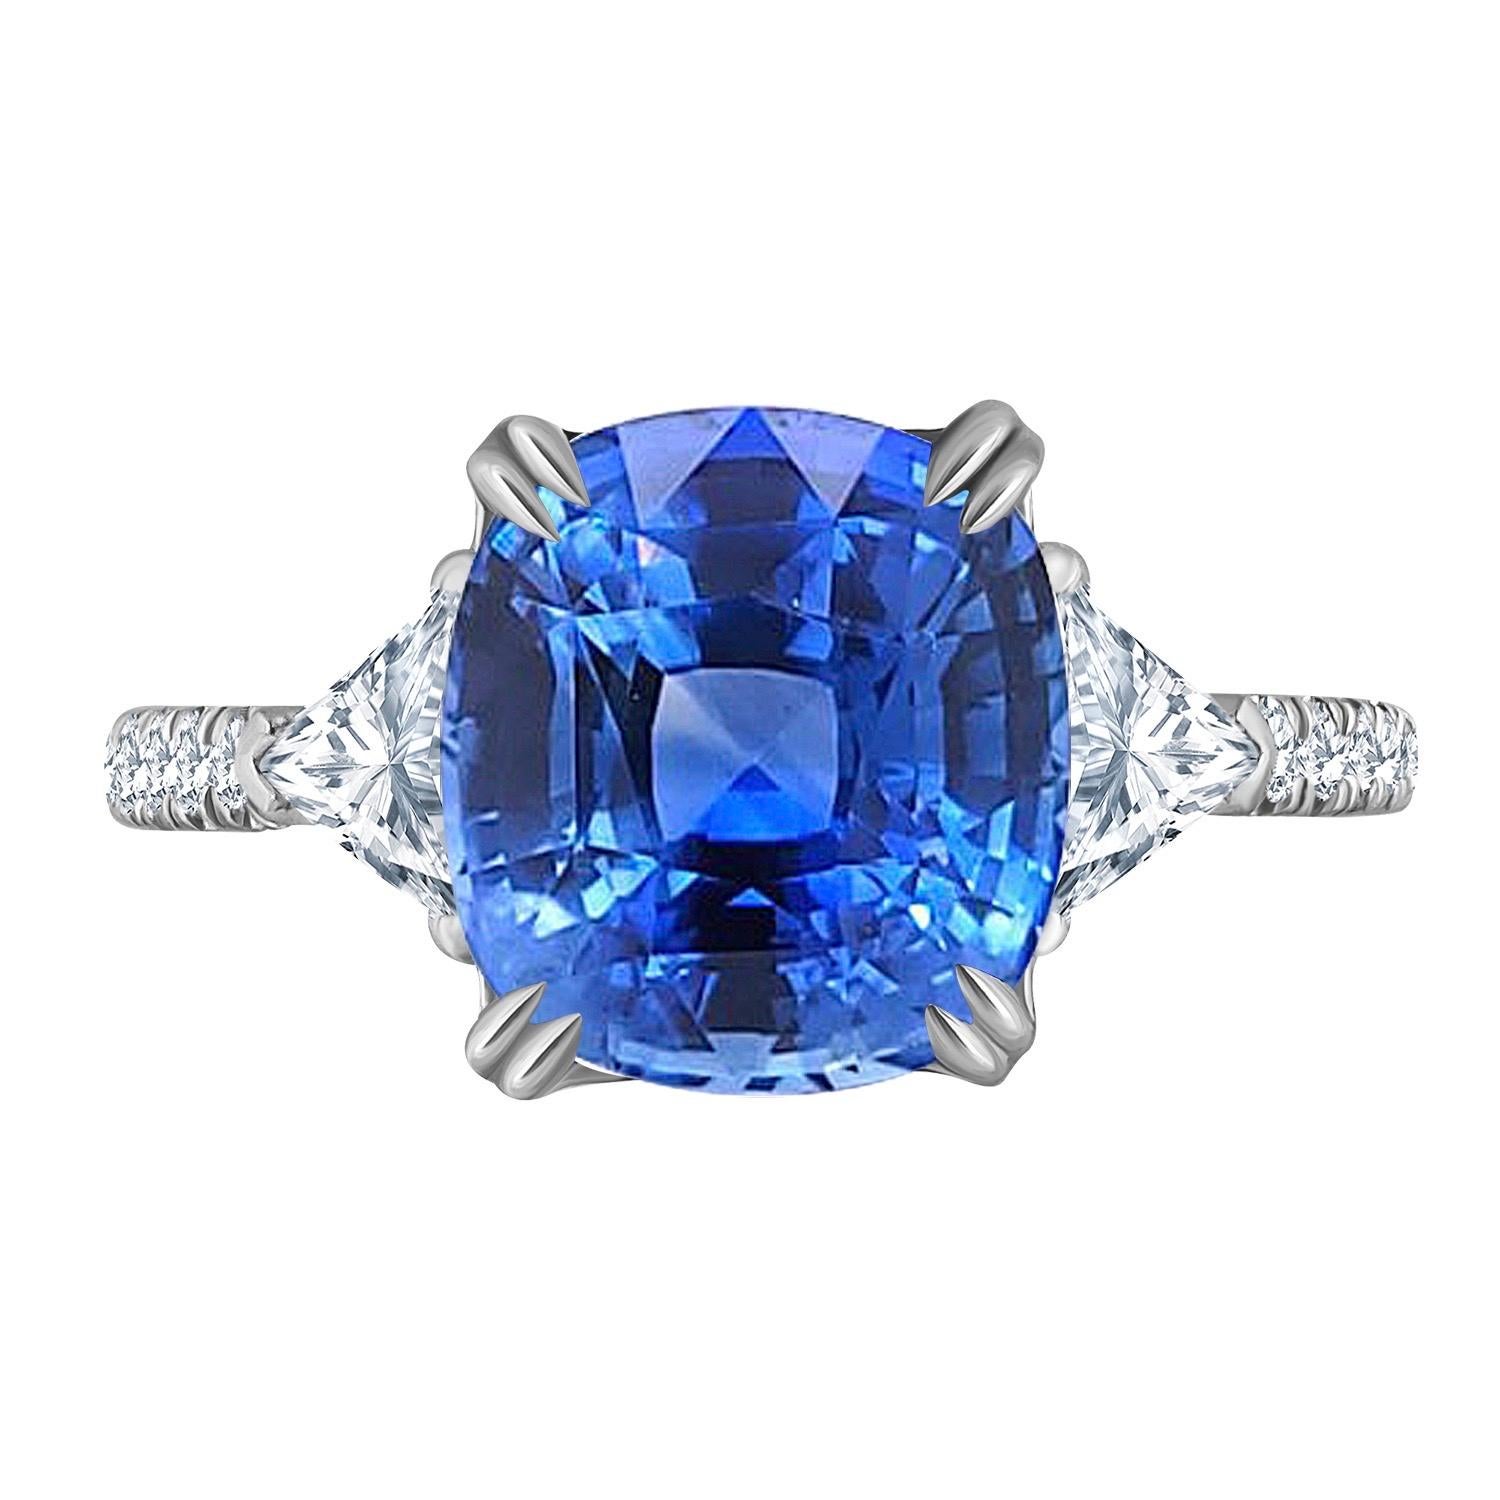 From the Emilio Jewelry vault in New York,
Featuring a Ceylon sapphire certified by C.Dunaigre as unheated ceylon. A wonderful bright medium tone with amazing facets that sparkle. 

You will love this ring, a must see! Private showings may be